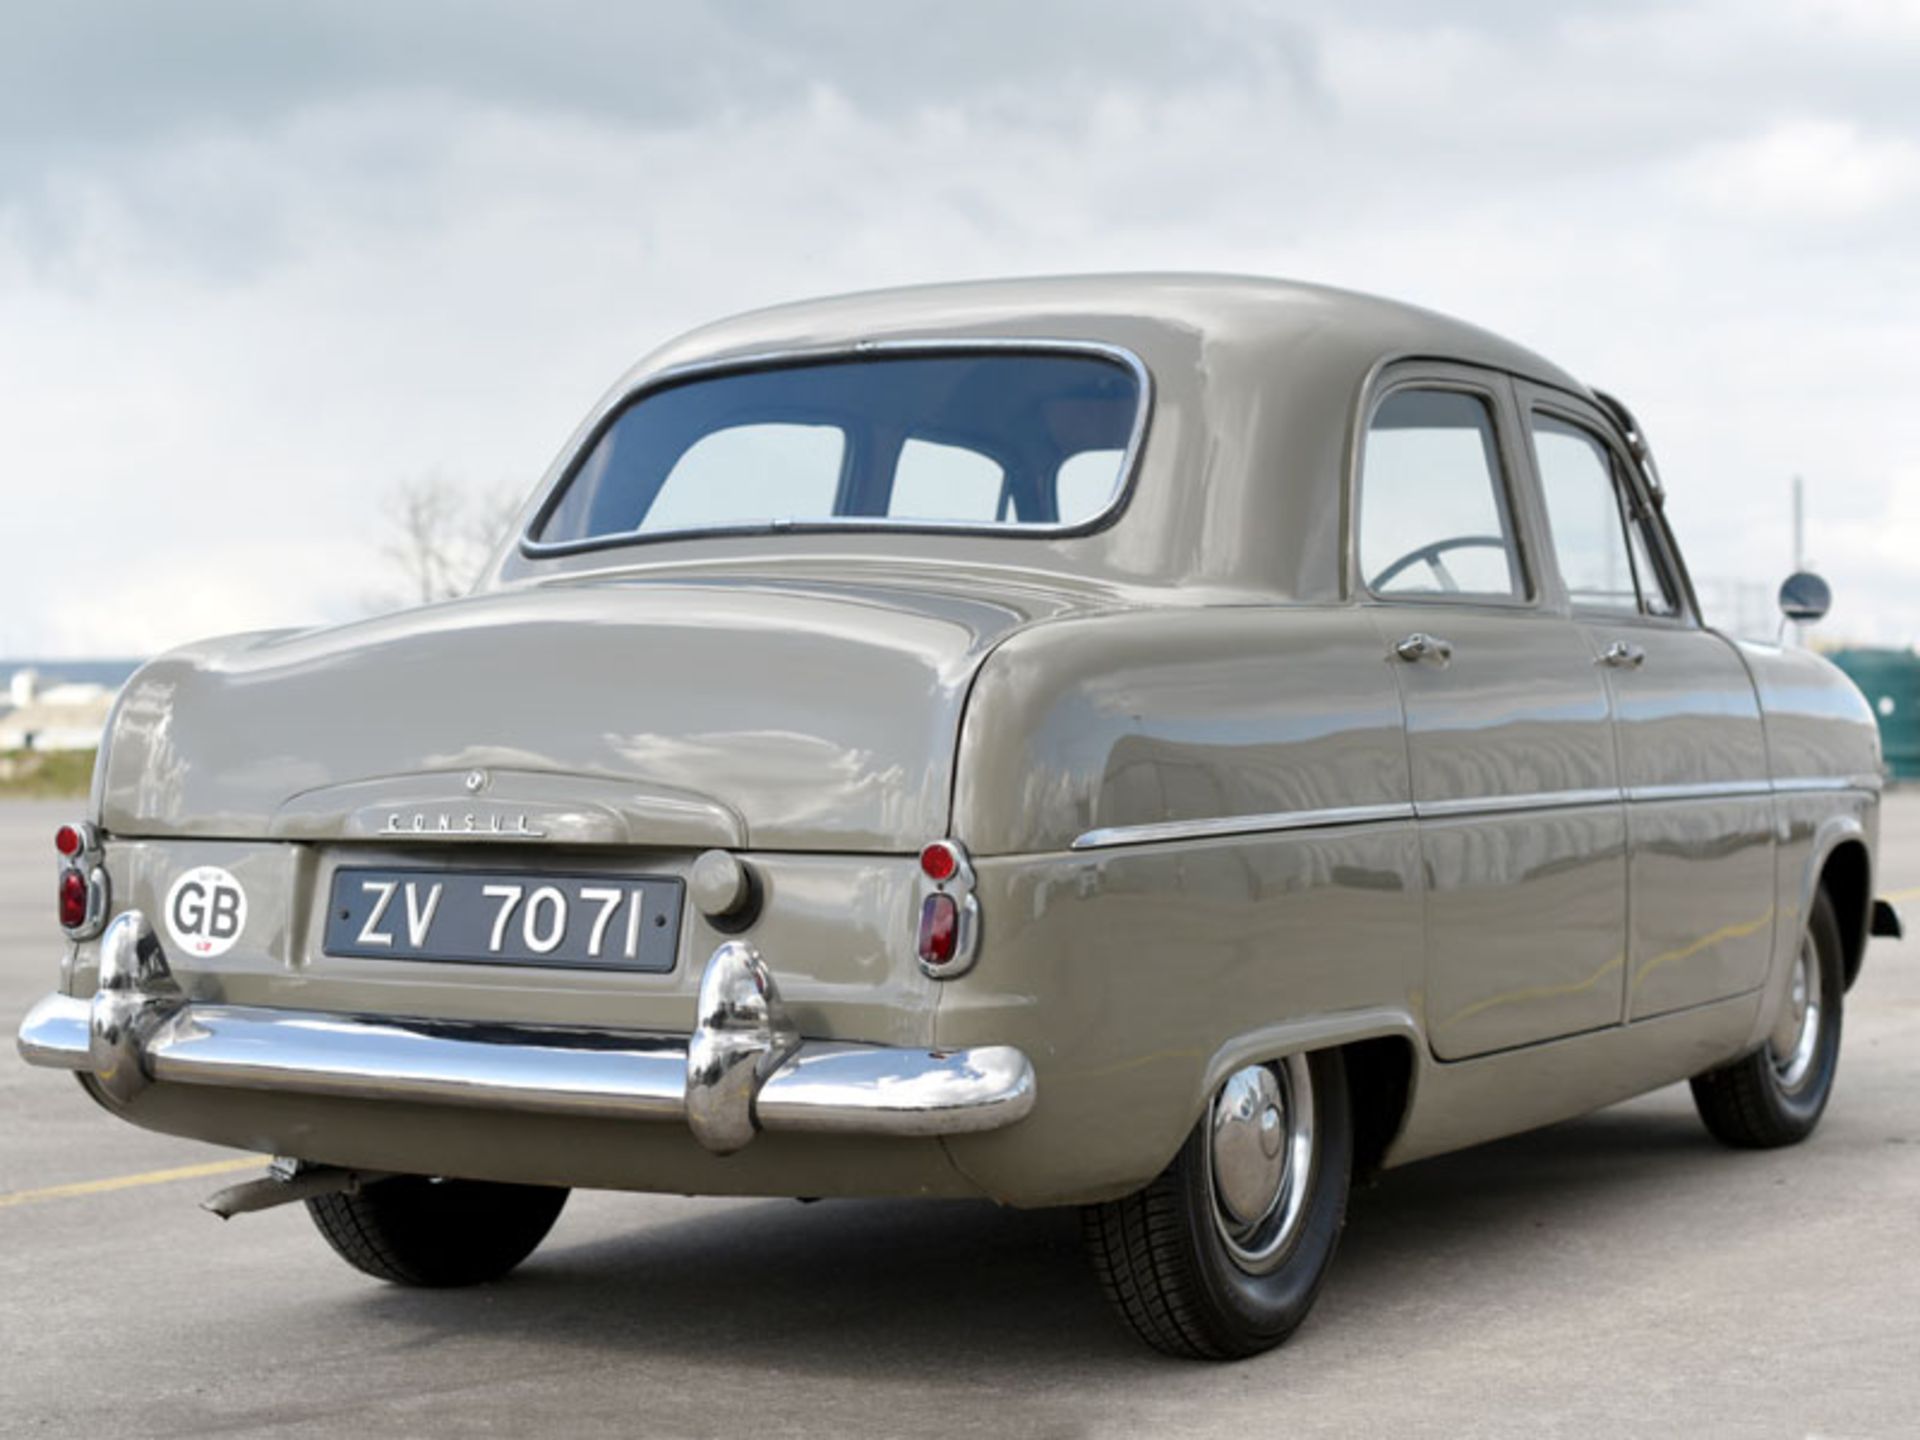 1953 Ford Consul - Image 3 of 6